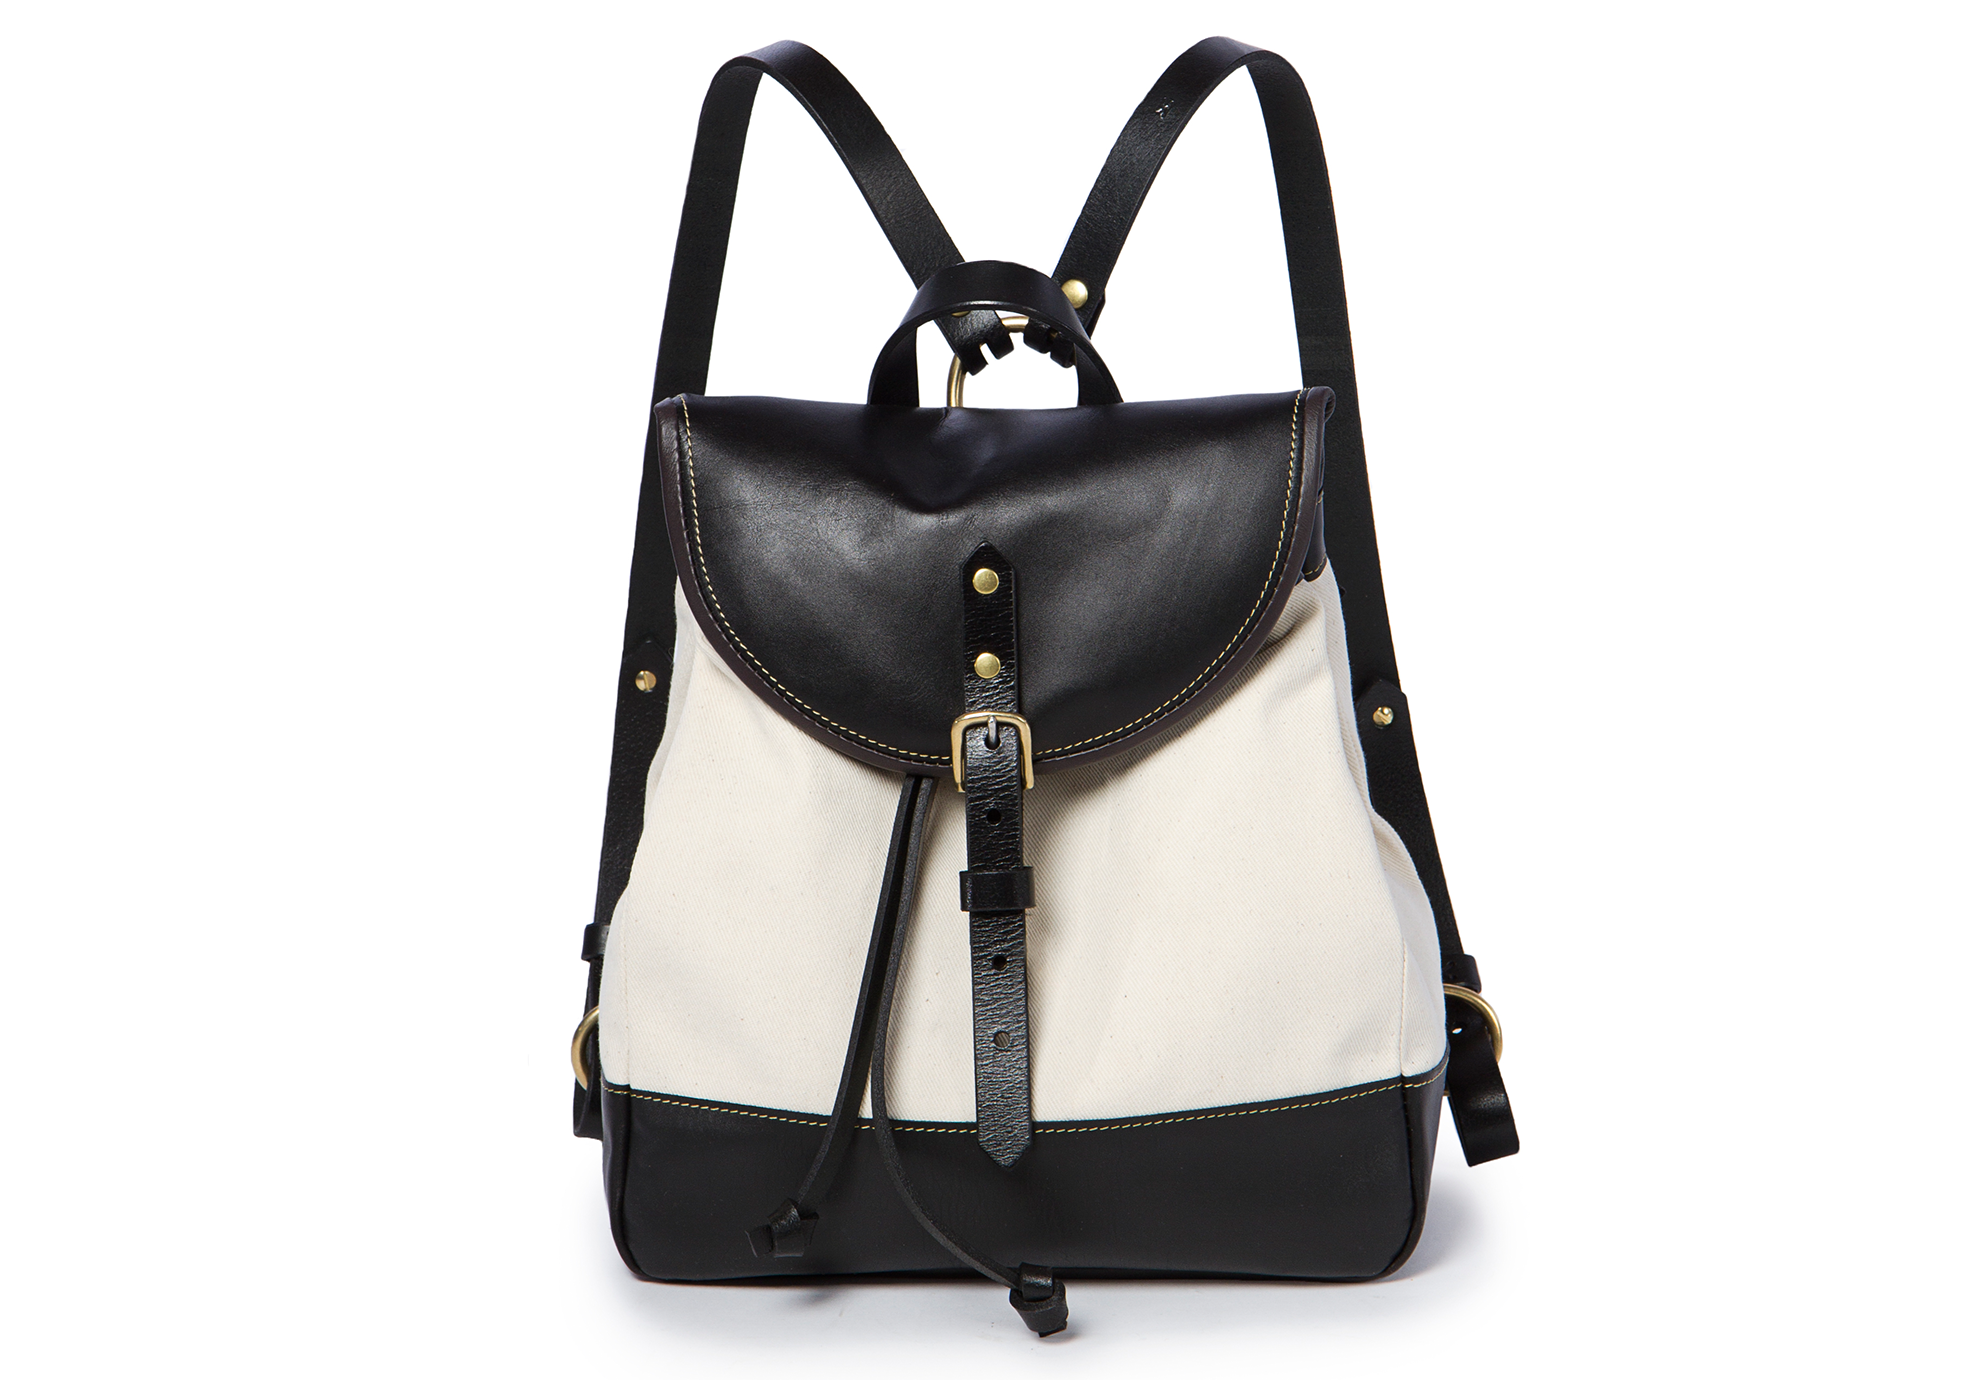 Canvas and leather backpack handmade in MTL Canada by Designer Kimberly Fletcher